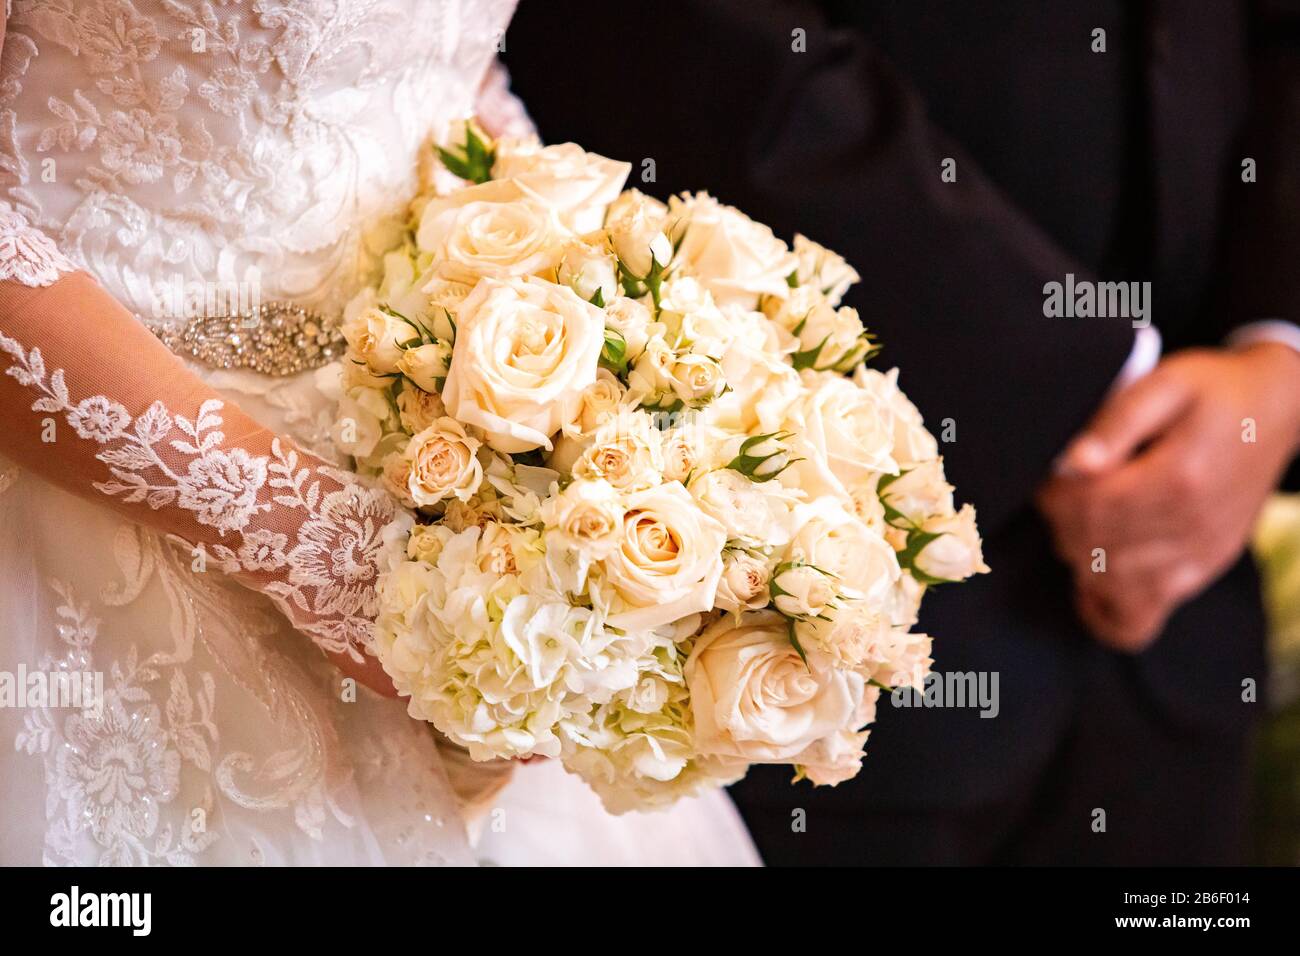 Beautiful bridal wedding bouquet isolated in hands with blurred groom together Stock Photo